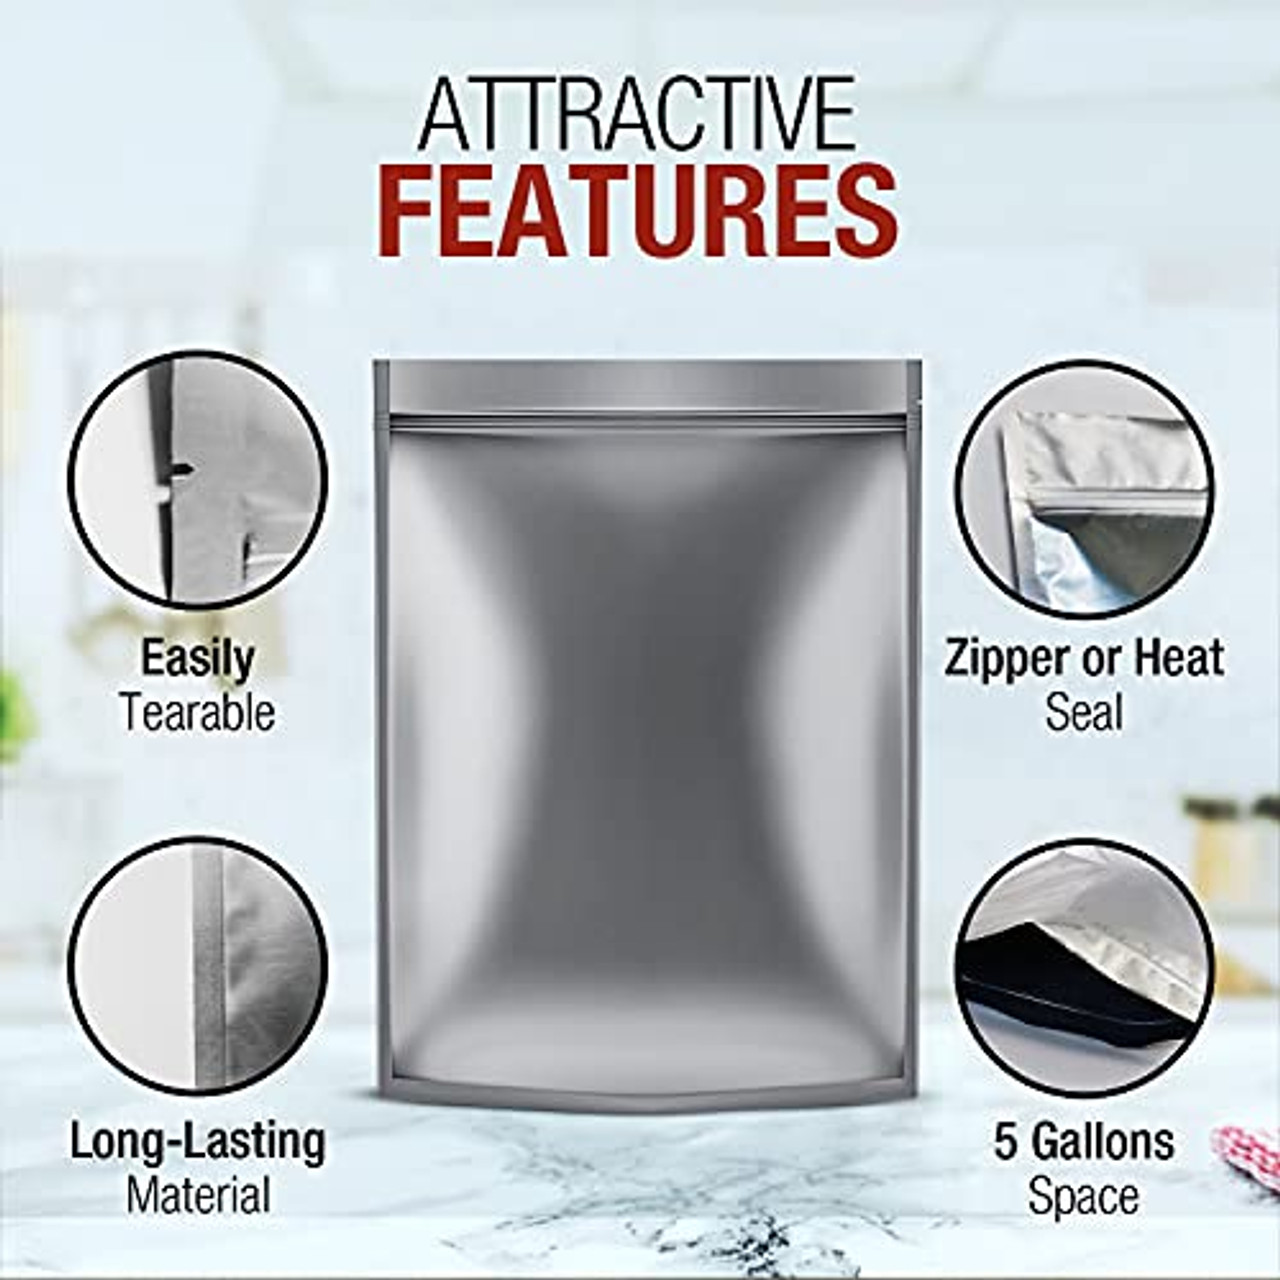 50 Mylar Bags 1 Gallon - Extra Thick 7.4 Mil - 10x14 Airtight Vacuum  Sealing Sealable Mylar Bags for Long Term Food Storage - Odor Free Heat